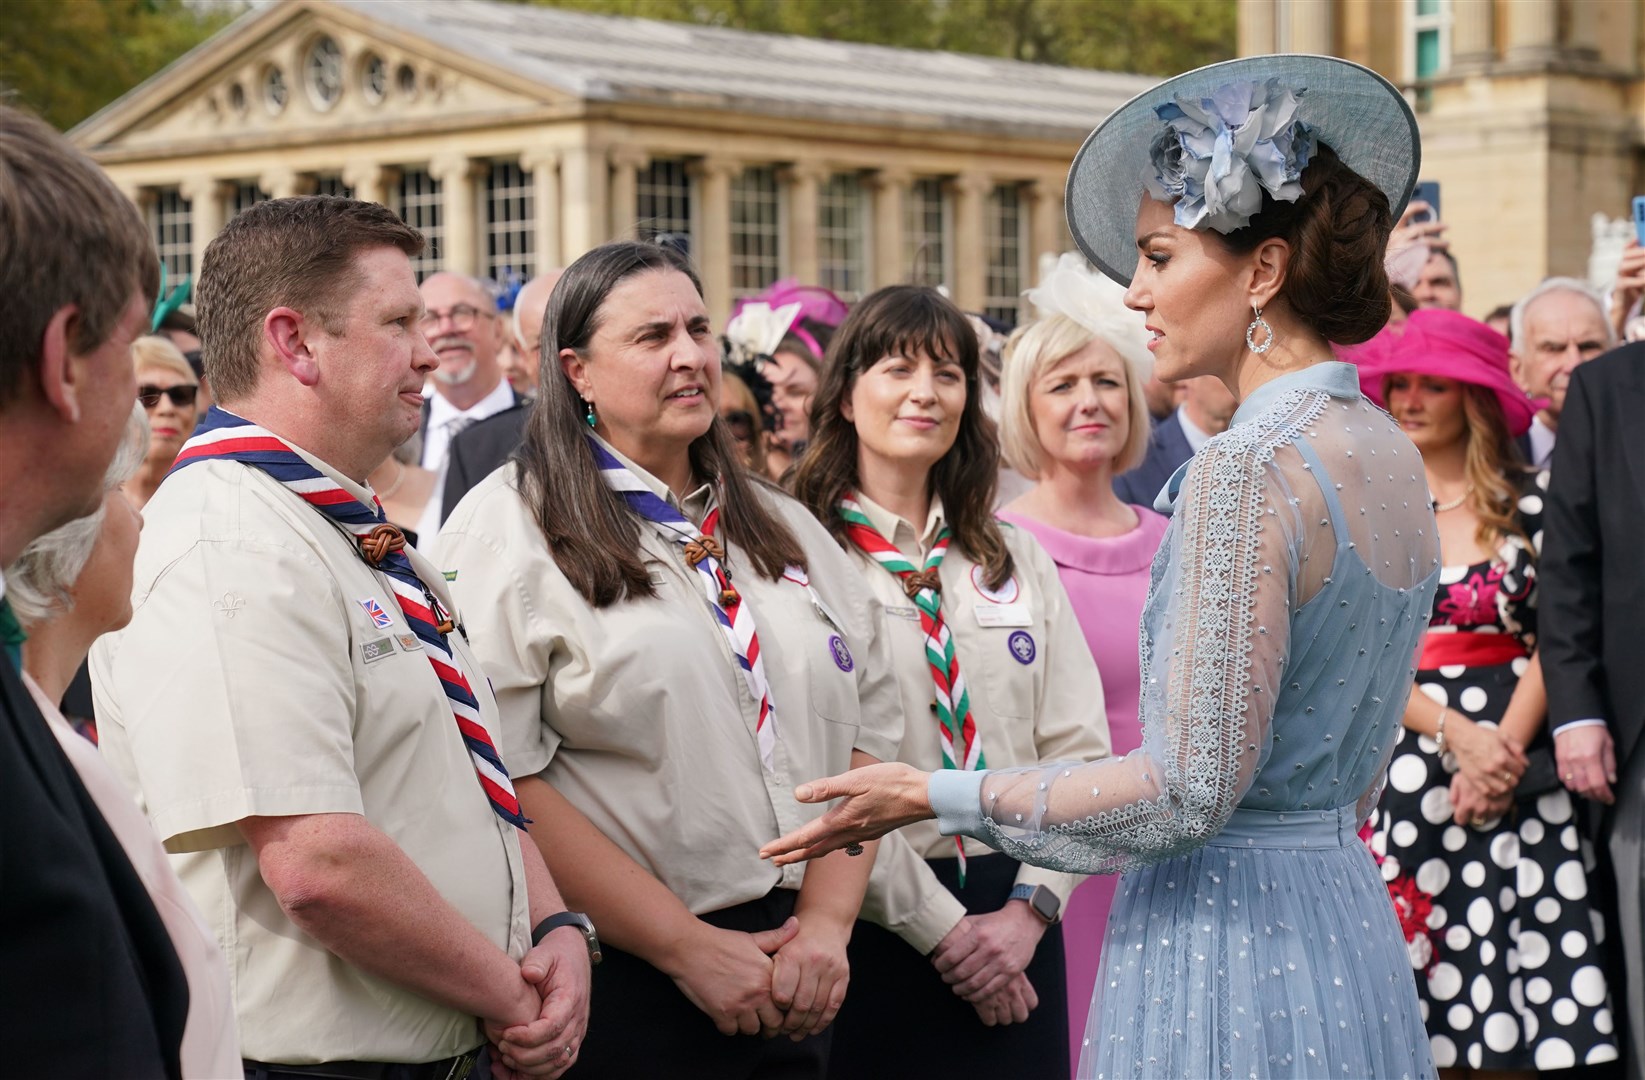 The Princess of Wales met Scouts during the garden party (Jonathan Brady/PA)